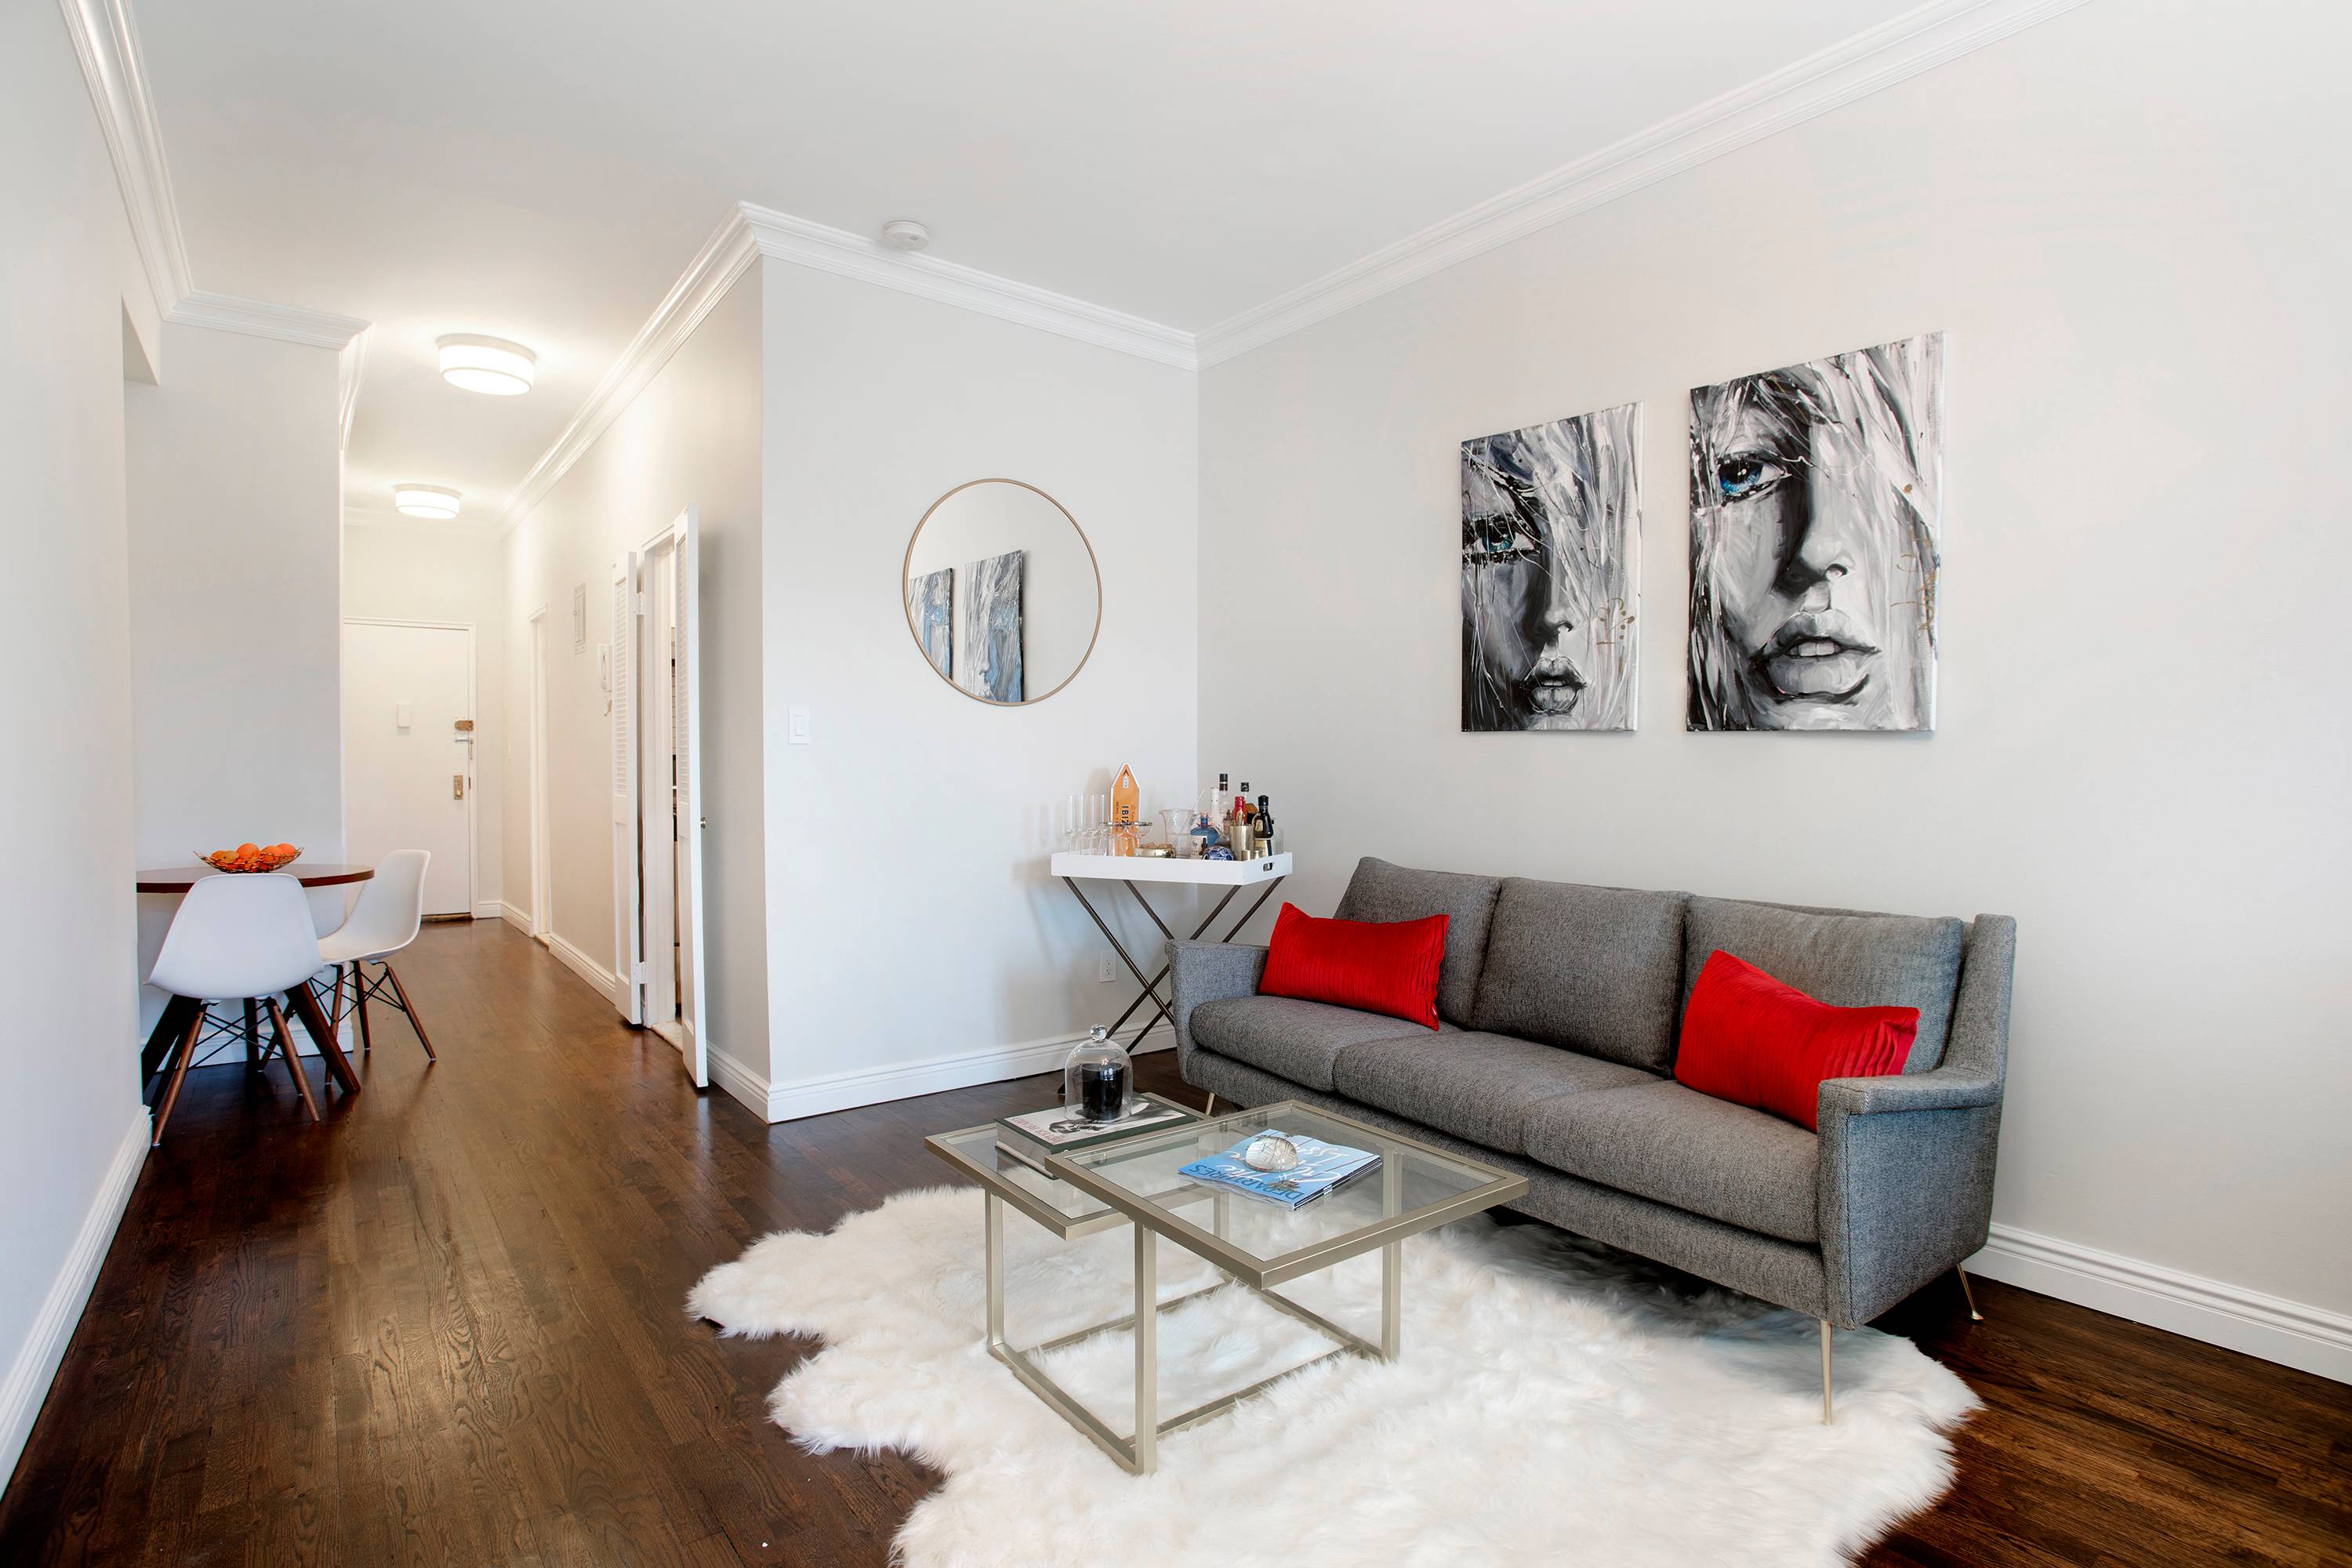 Sophisticated, sun drenched, newly renovated West Village studio located on one of the most coveted blocks in rare doorman, elevator pre war building.